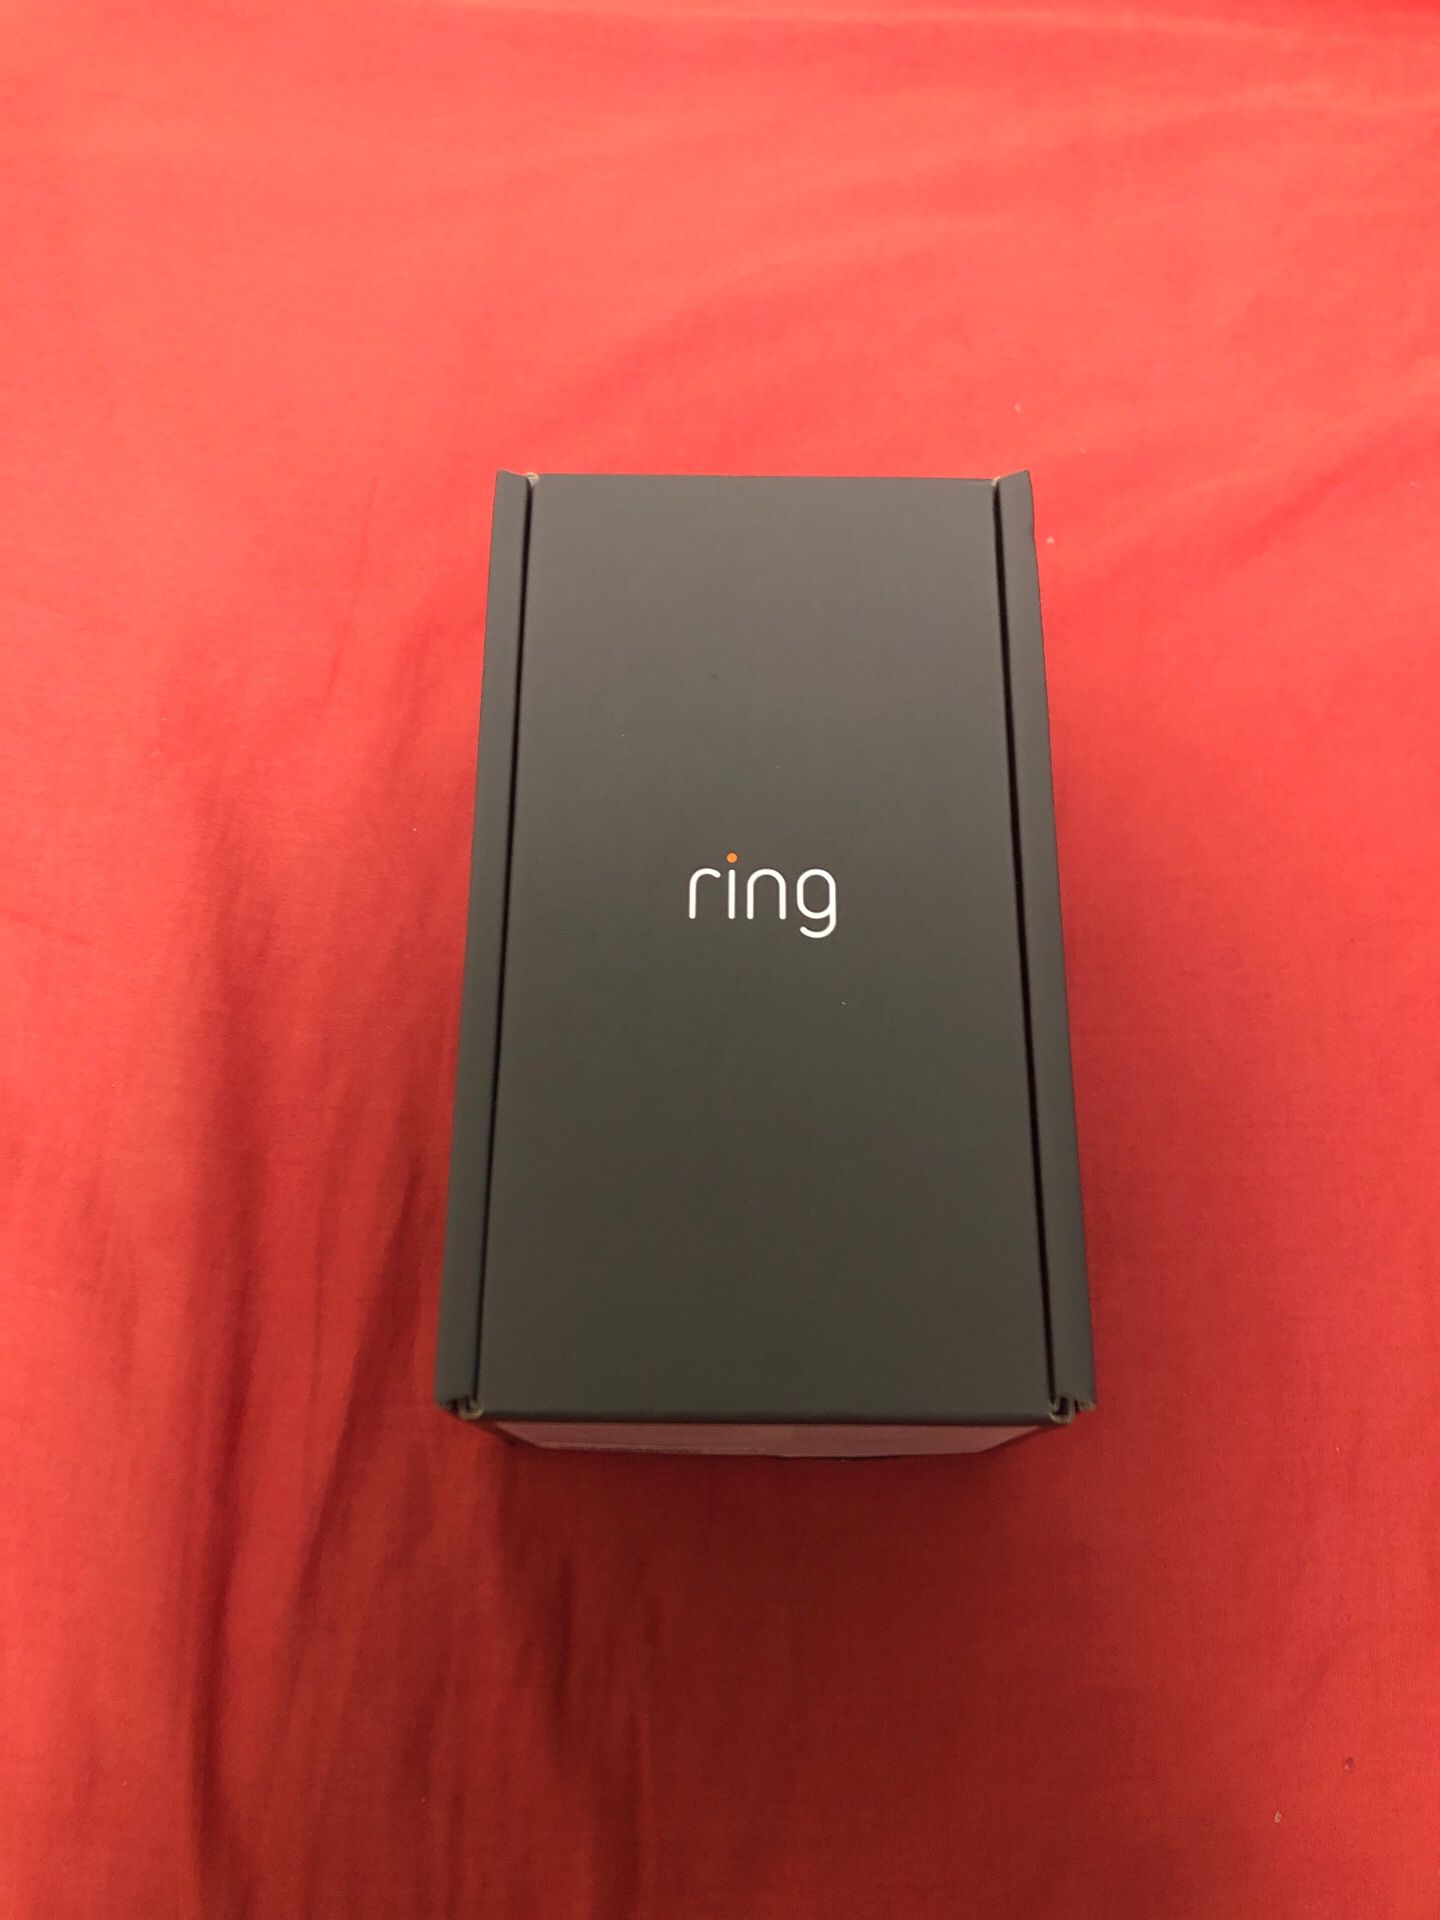 Ring video doorbell limited edition